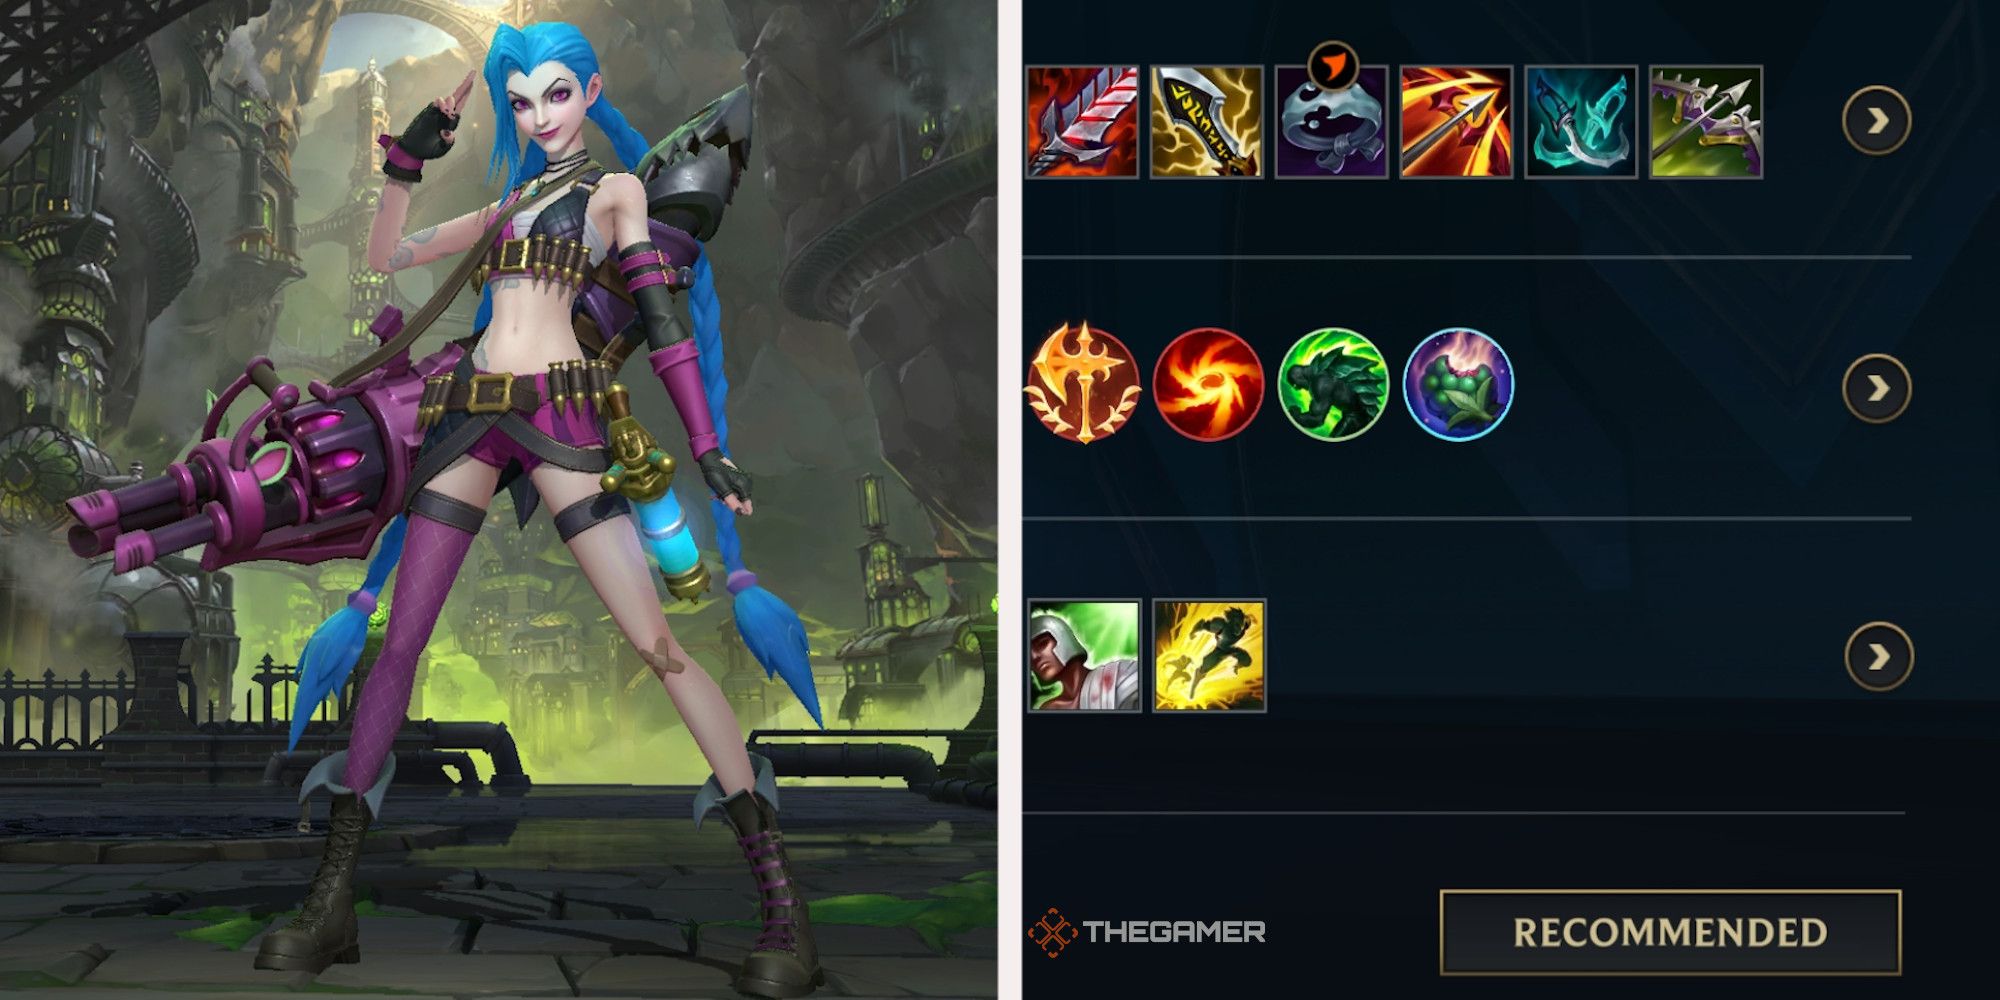 https://static1.thegamerimages.com/wordpress/wp-content/uploads/2021/11/Jinx-build-guide-loadout-recommended-items-skills-attacks-weapons-League-of-Legends-Wild-Rift-screenshots.jpg